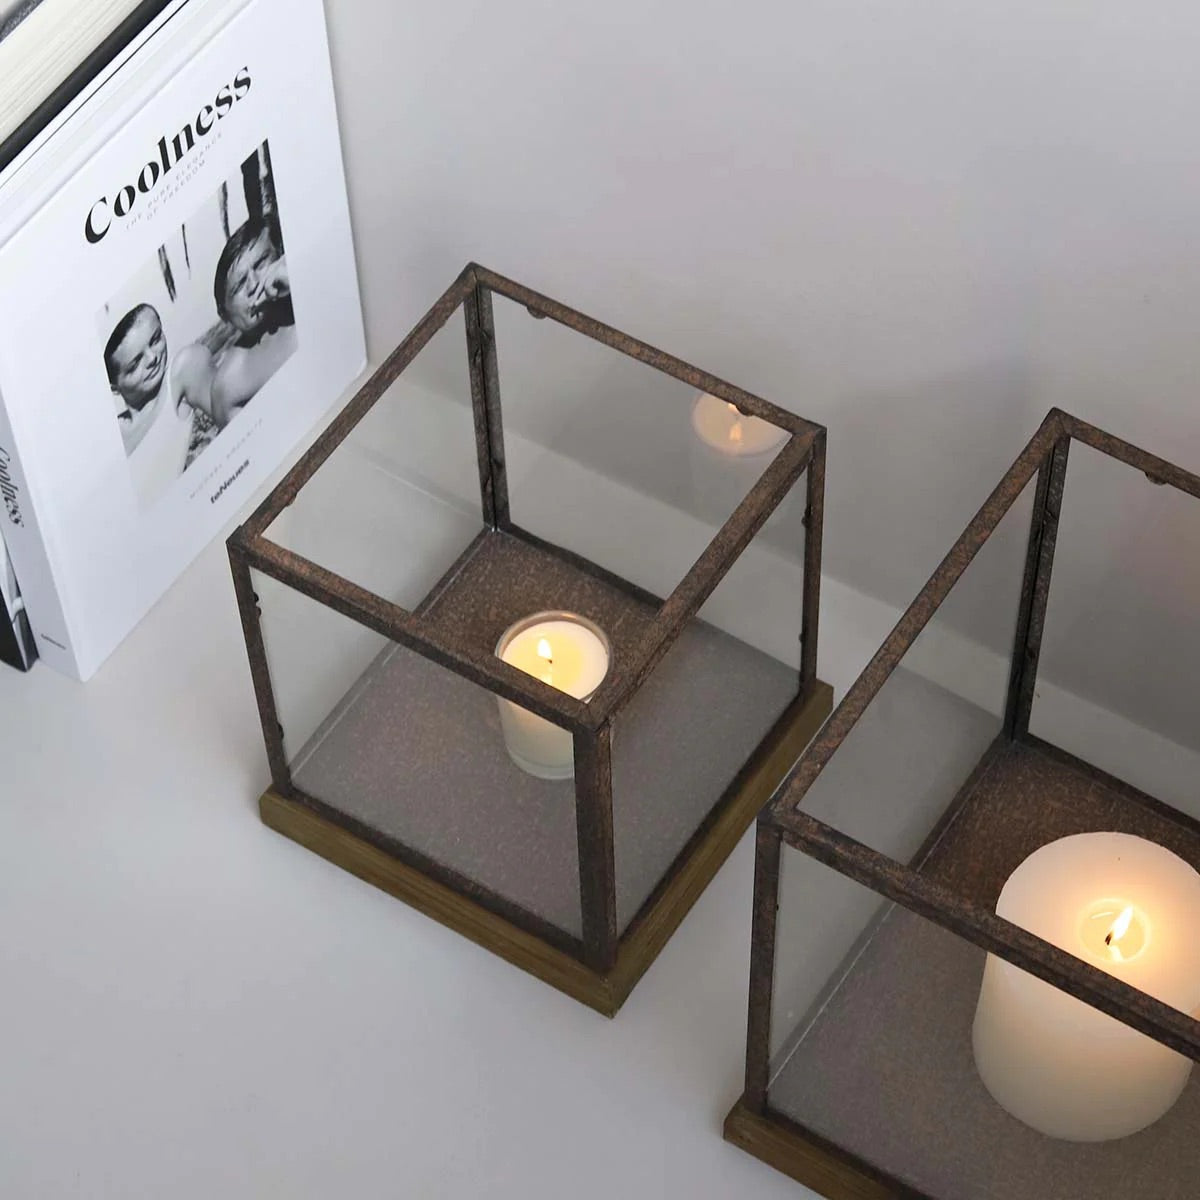 Set of Two Aged Square Candle Holders